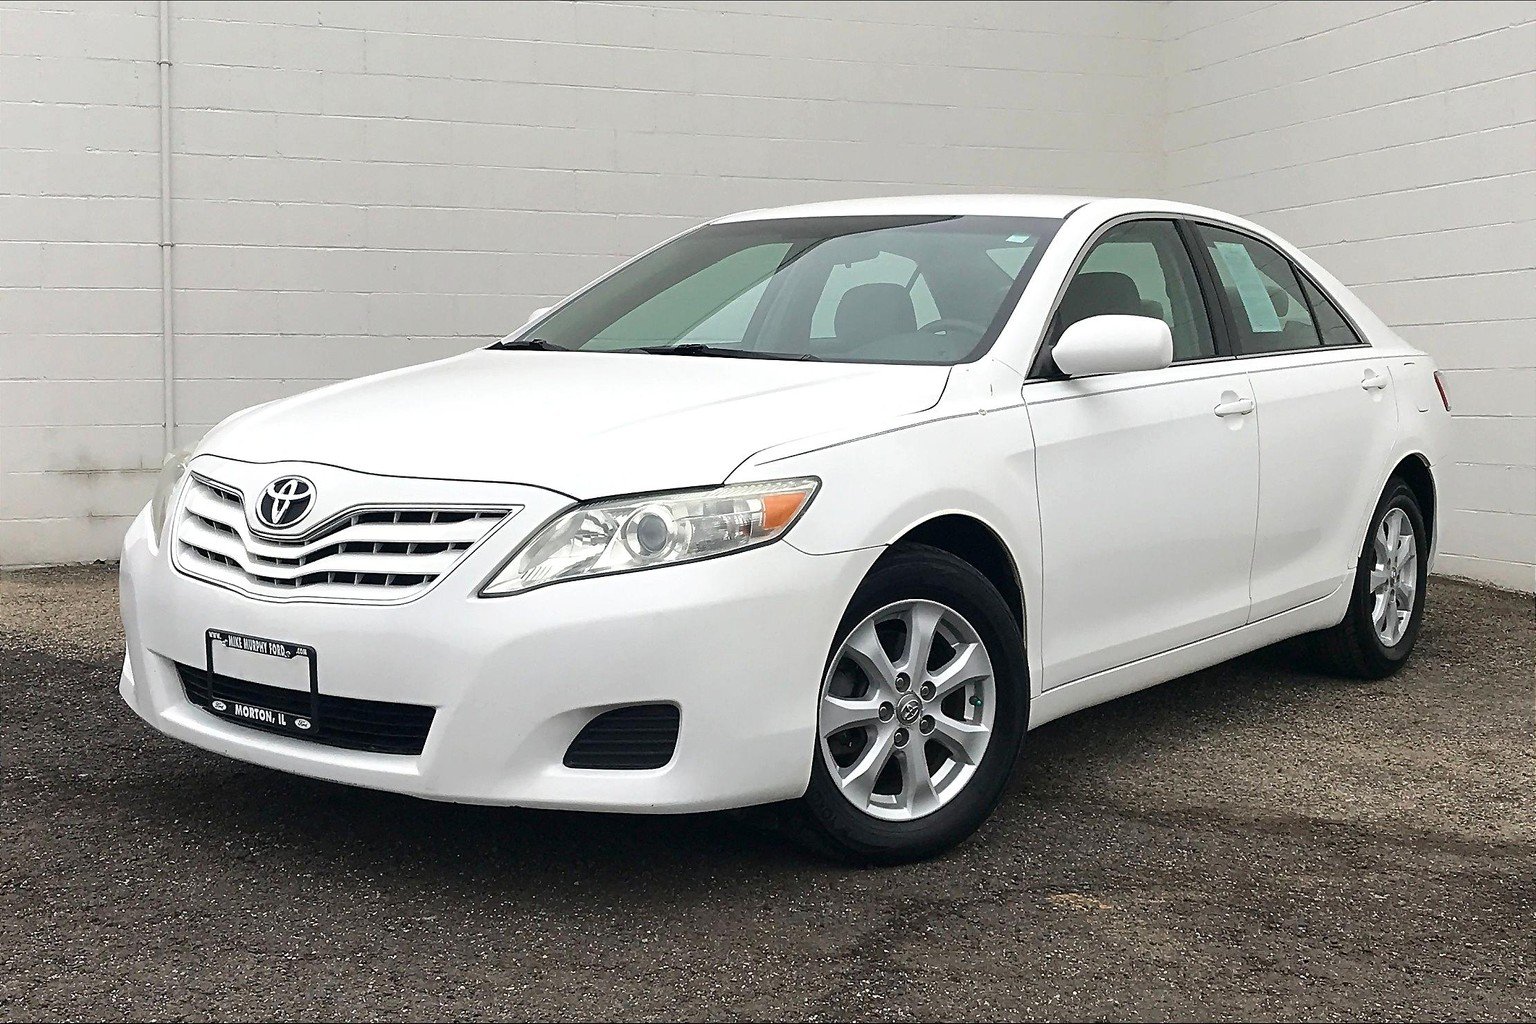 Pre-Owned 2011 Toyota Camry LE 4D Sedan in Morton #166212 | Mike Murphy